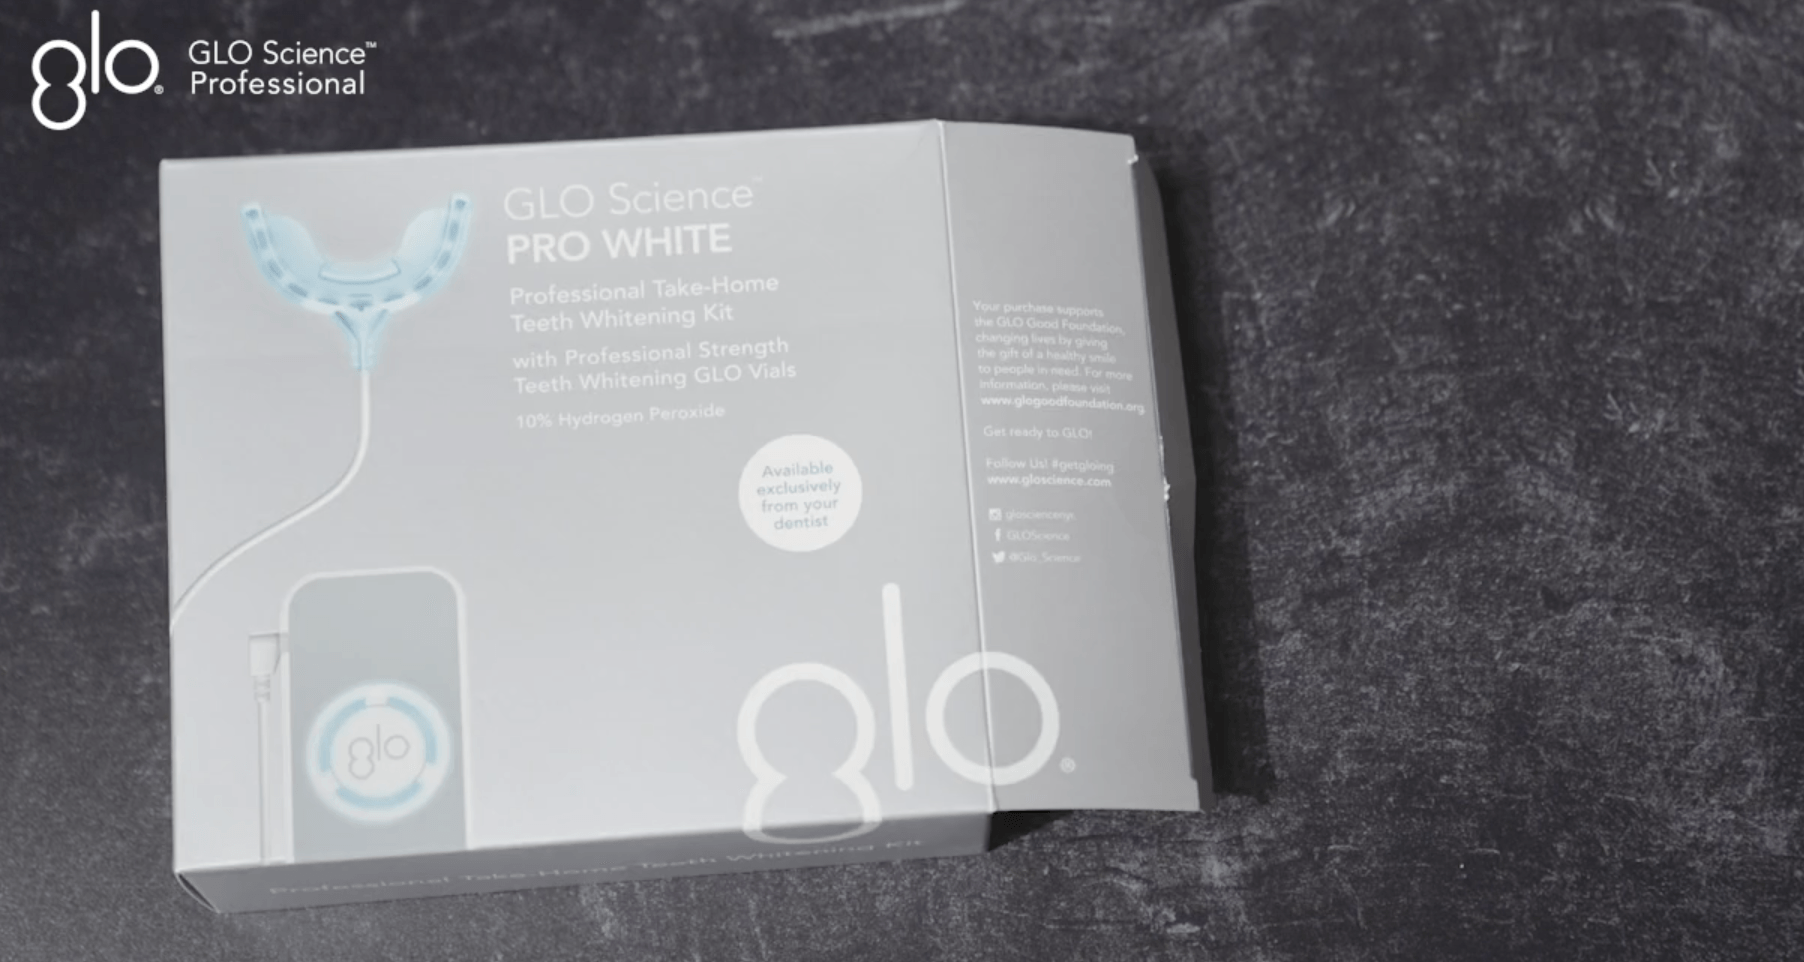  GLO Science Professional Teeth Whitening Take Home & Chairside Patient Kit Highlight